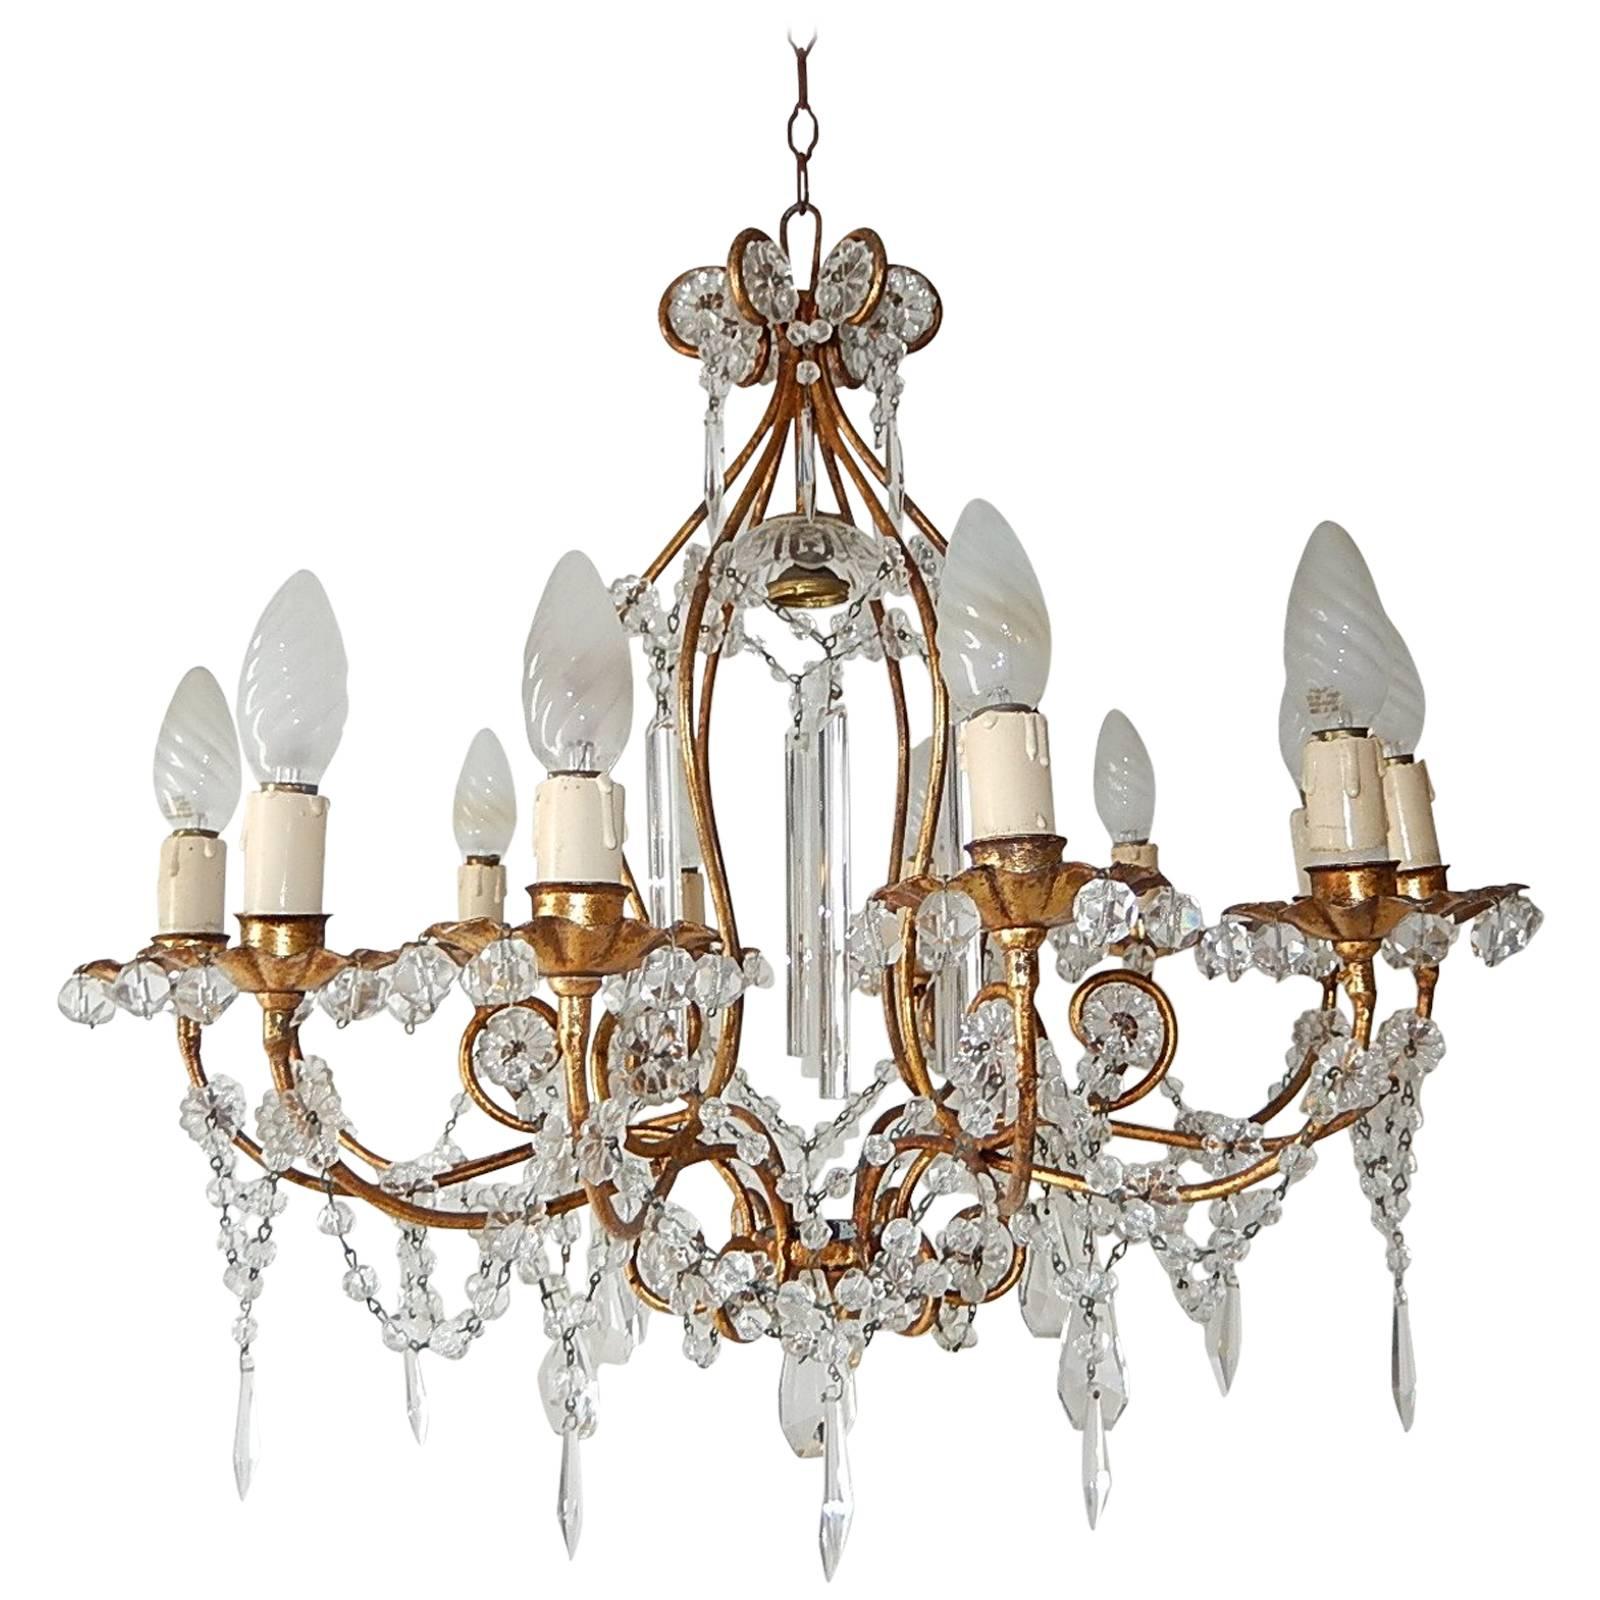 13 Lights French Rare Crystal Prisms Chandelier, circa 1920